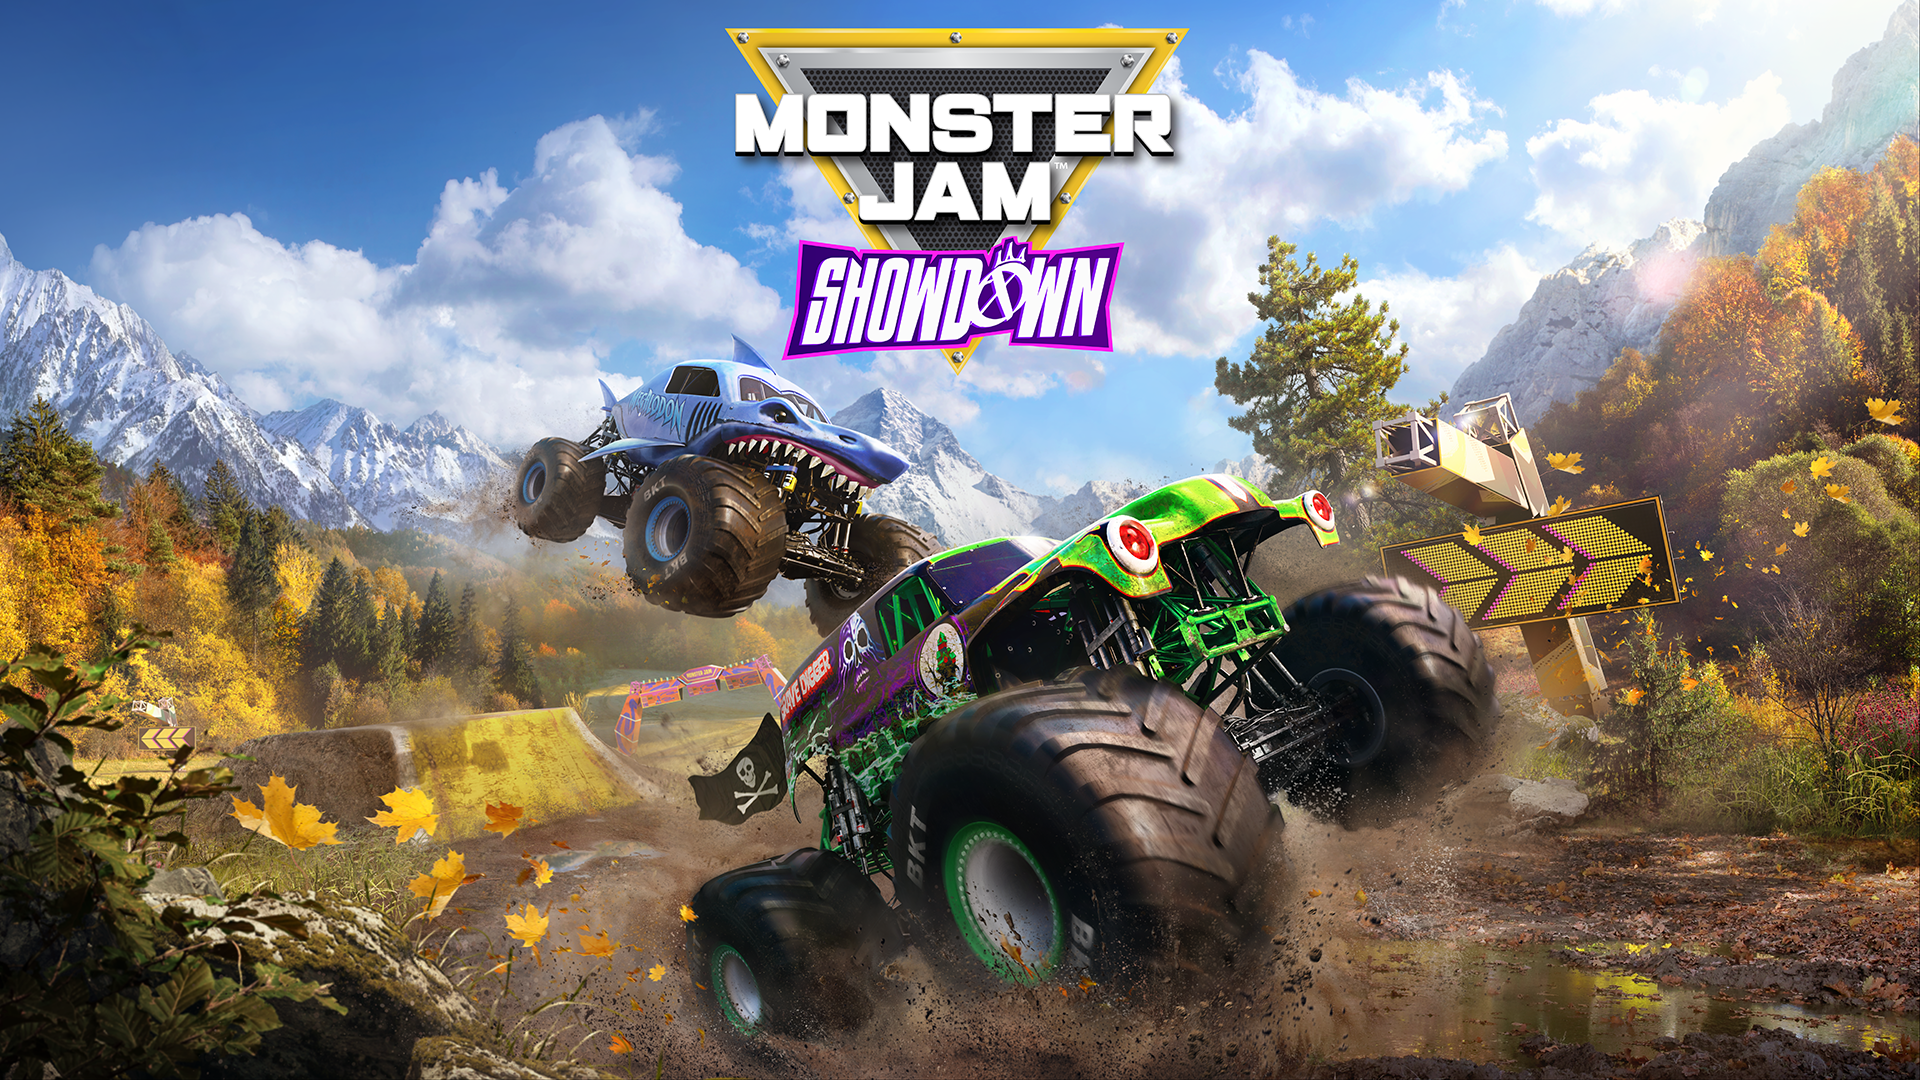 The latest Monster Jam Showdown video game will be released in August